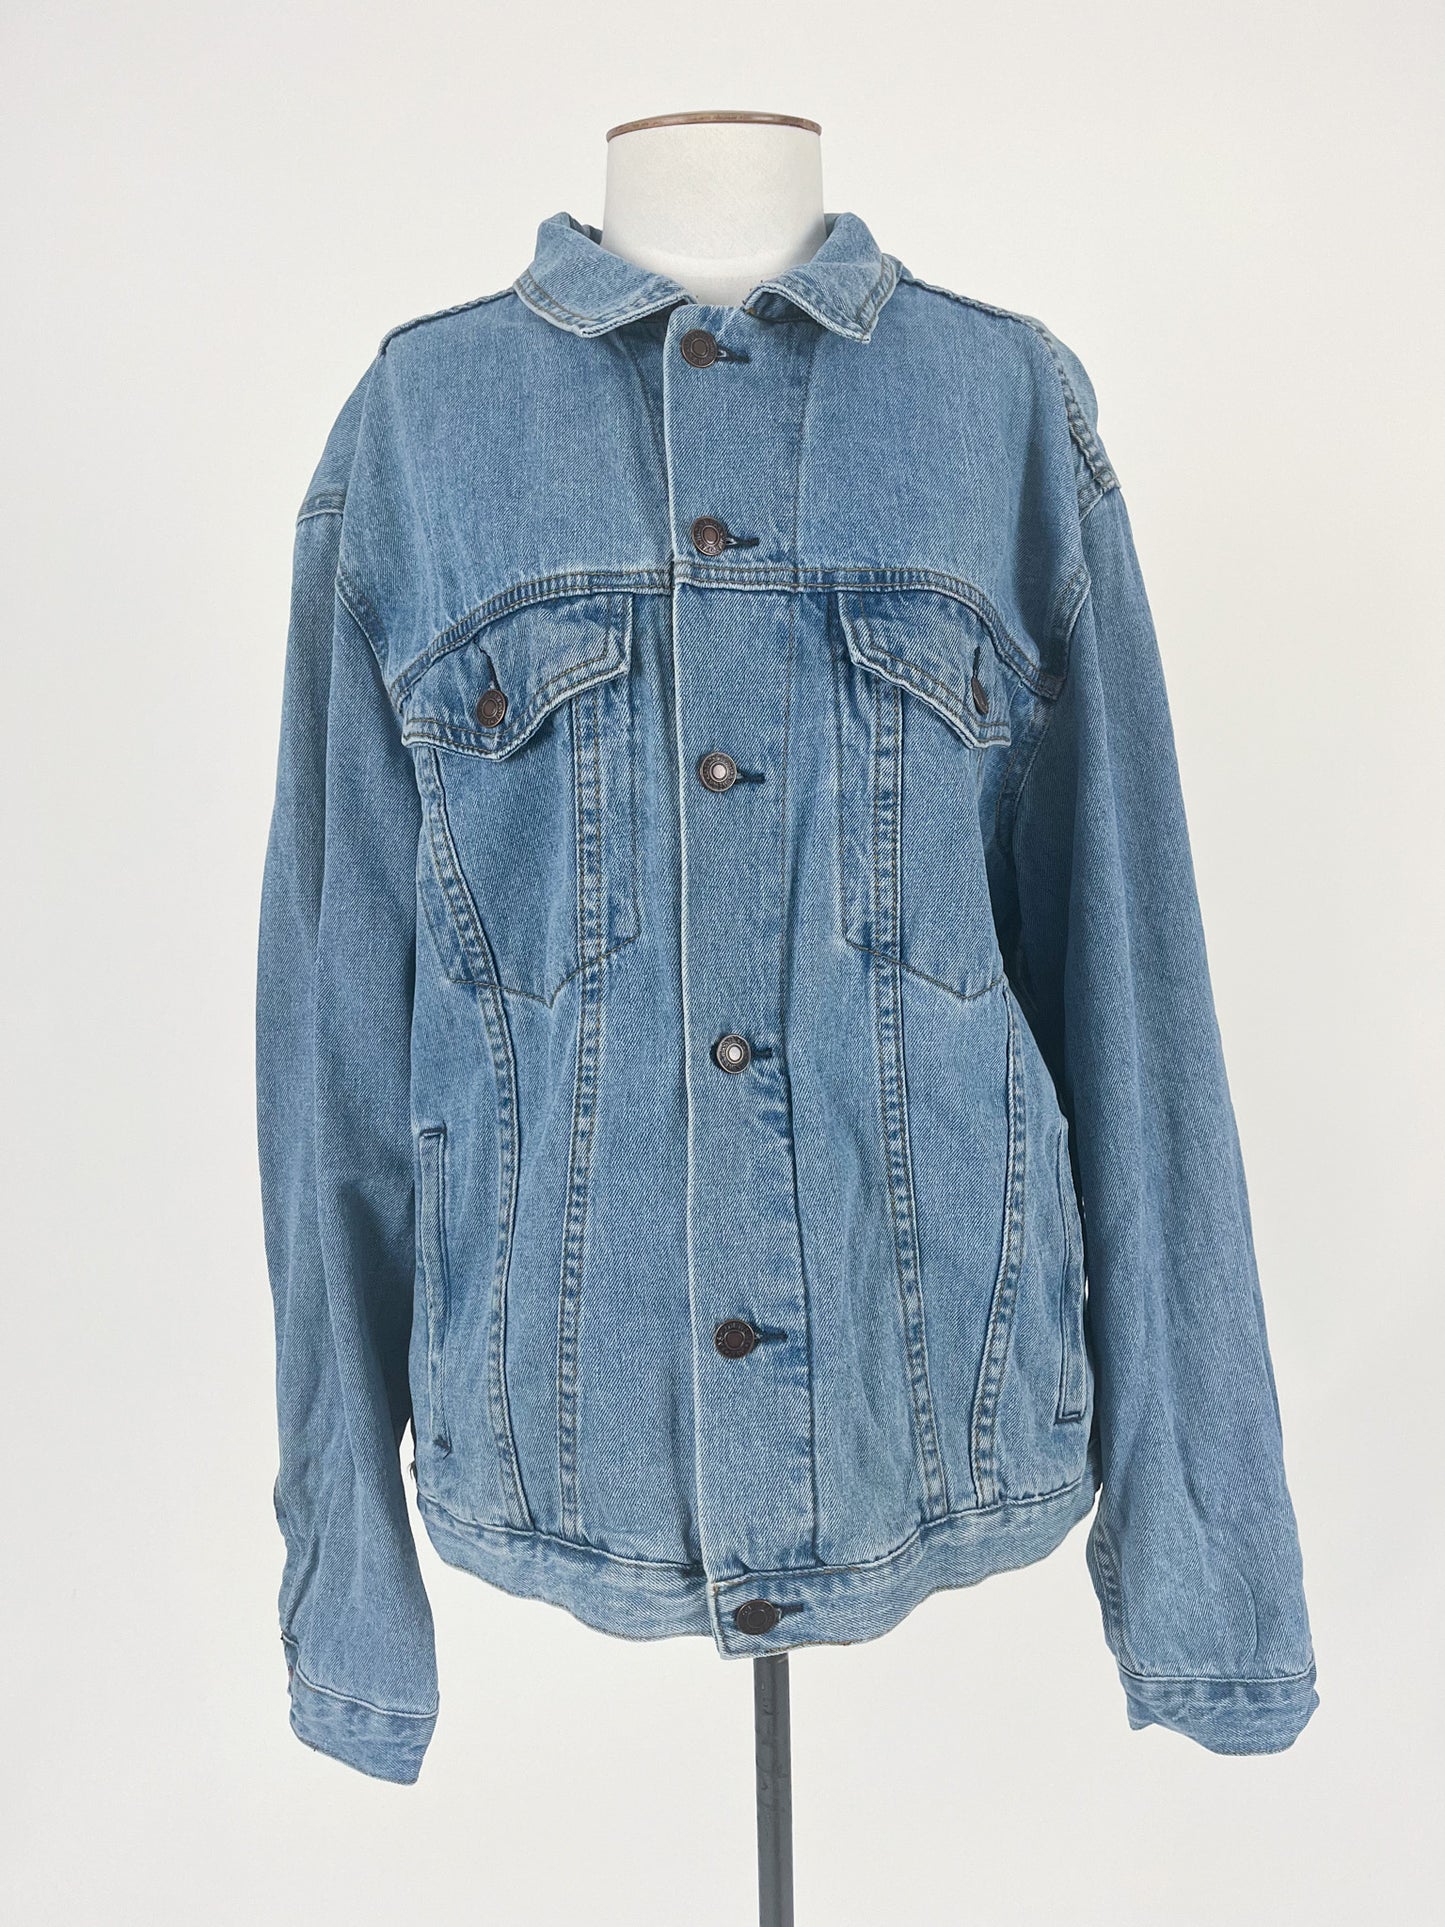 Polly | Blue Casual/Workwear Jacket | Size OS